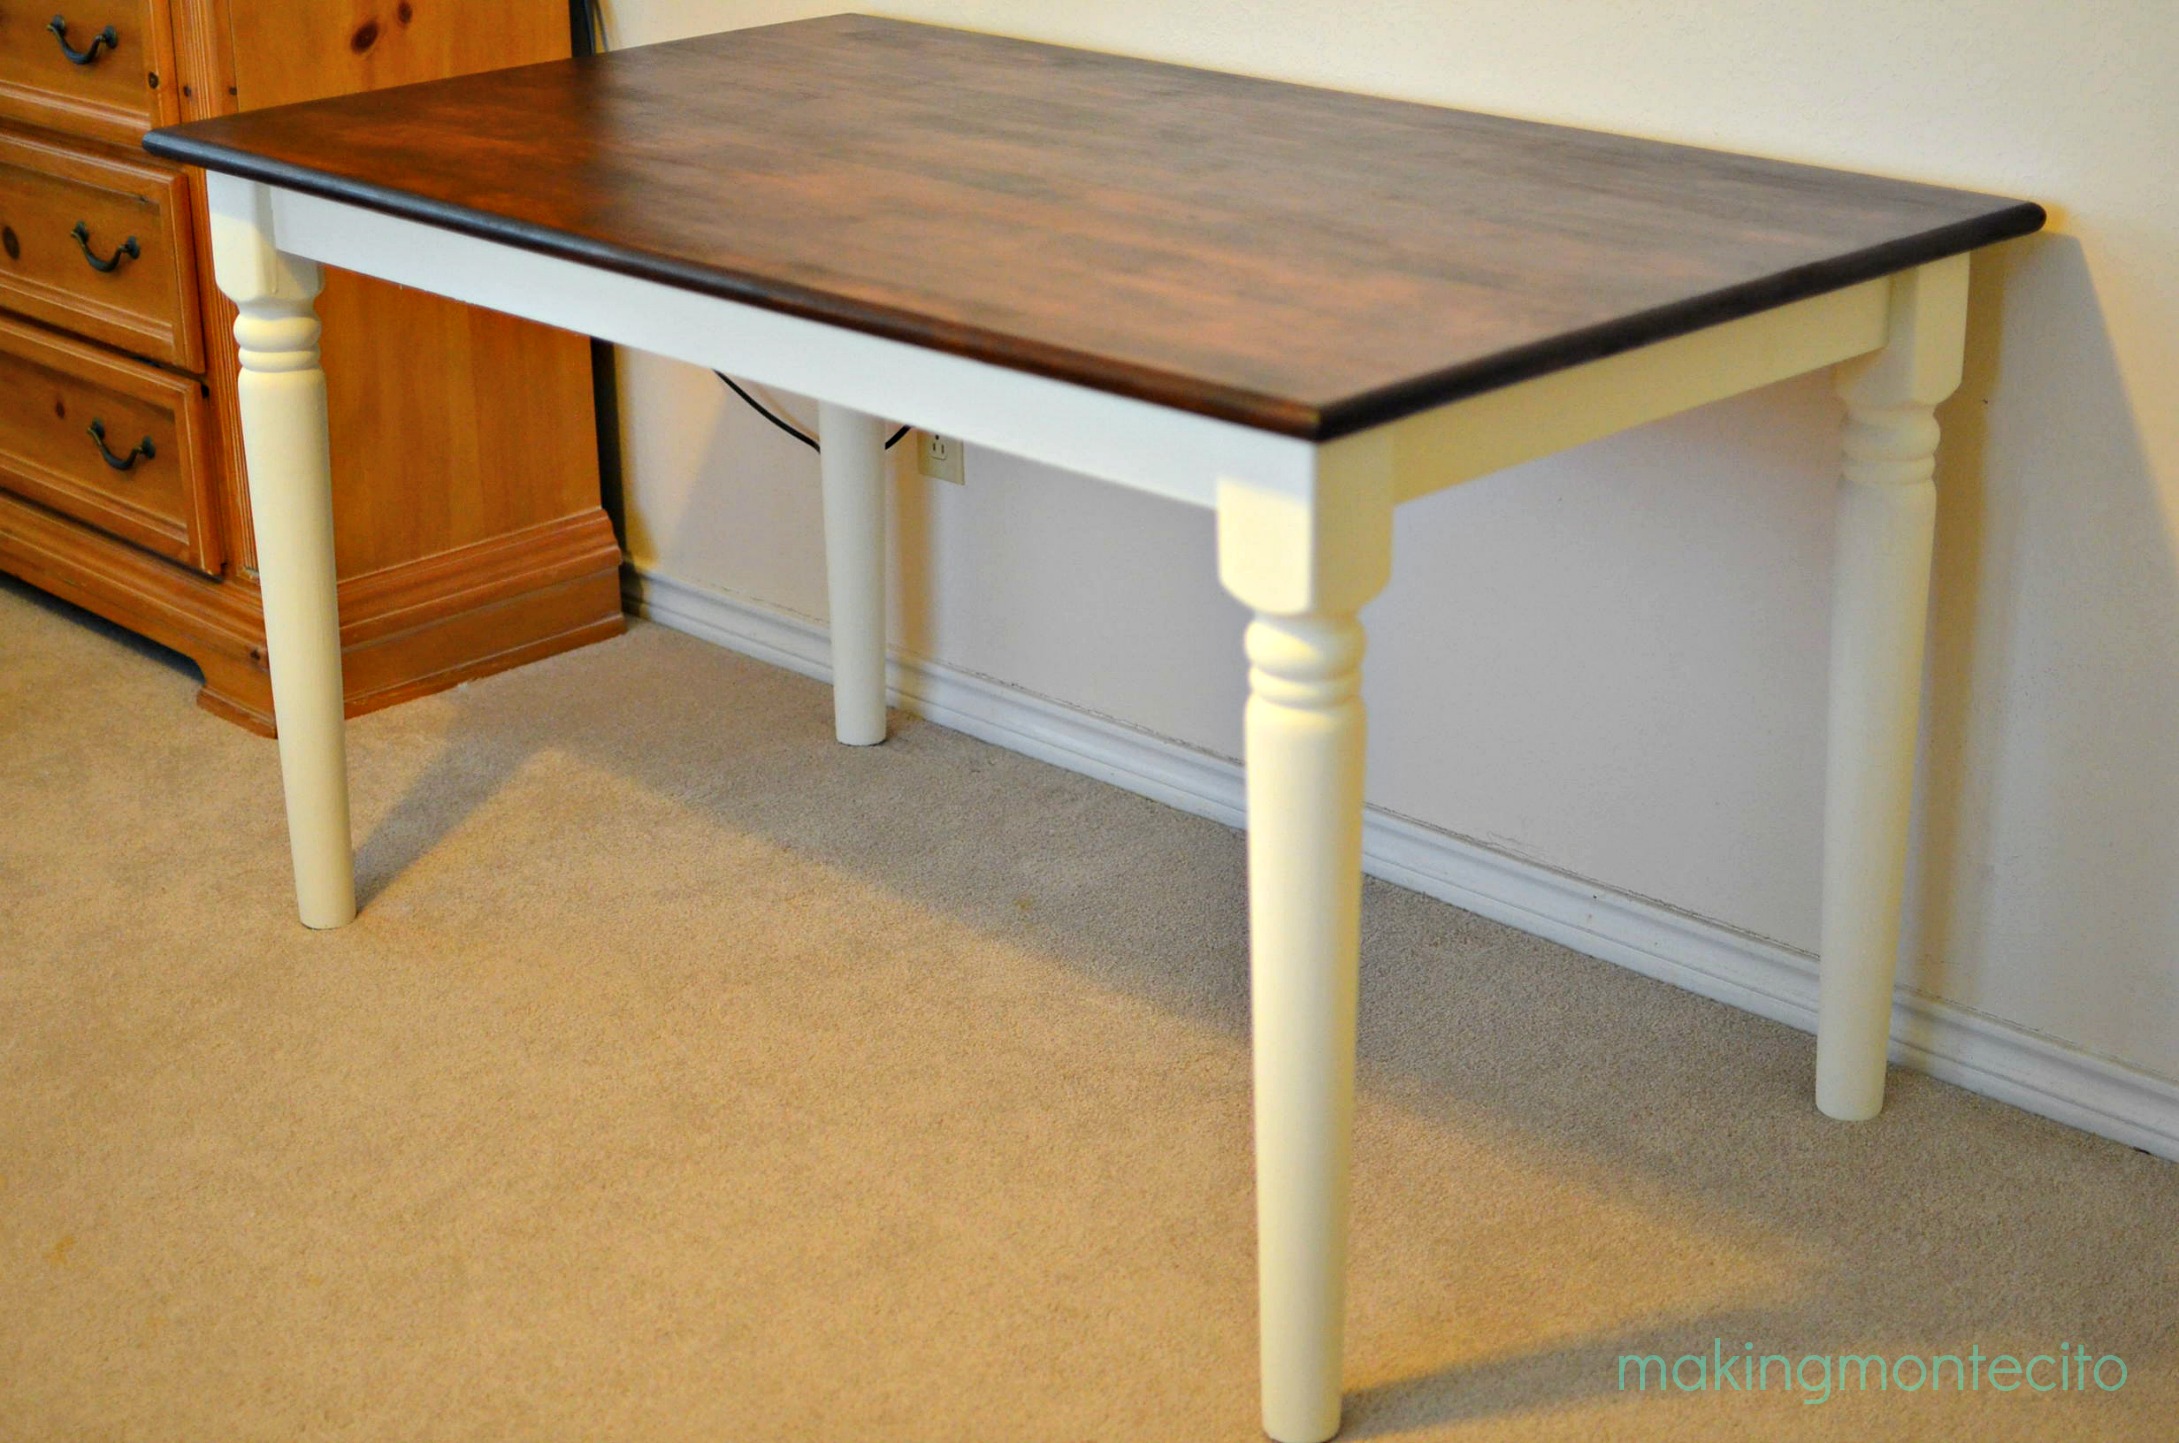 making montecito - table makeover 7